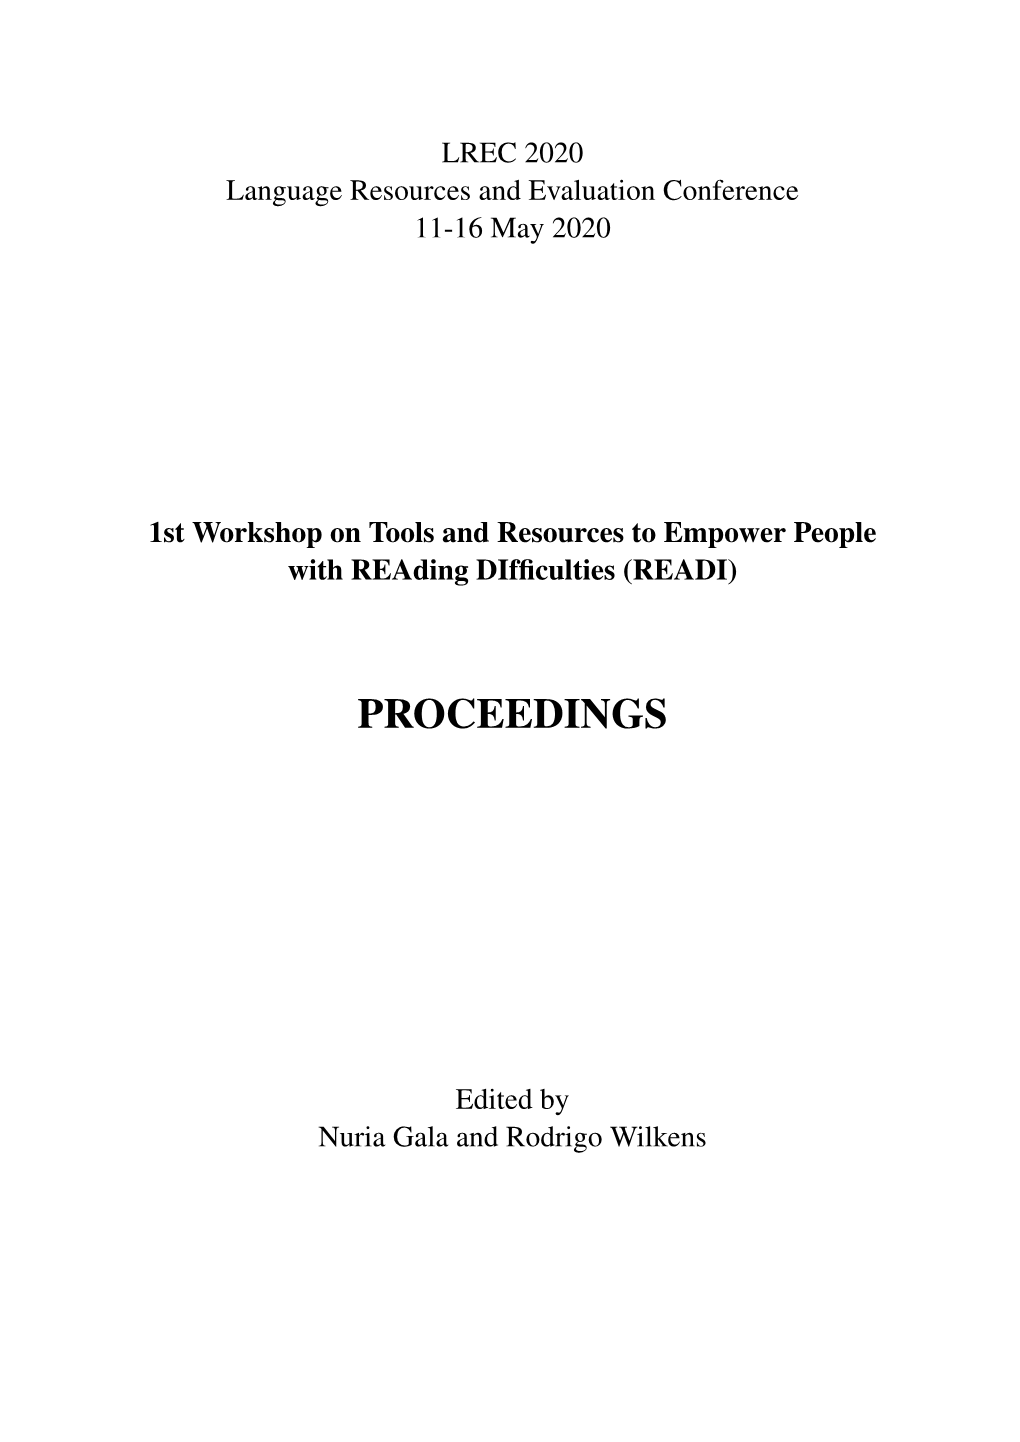 Proceedings of the 1St Workshop on Tools and Resources